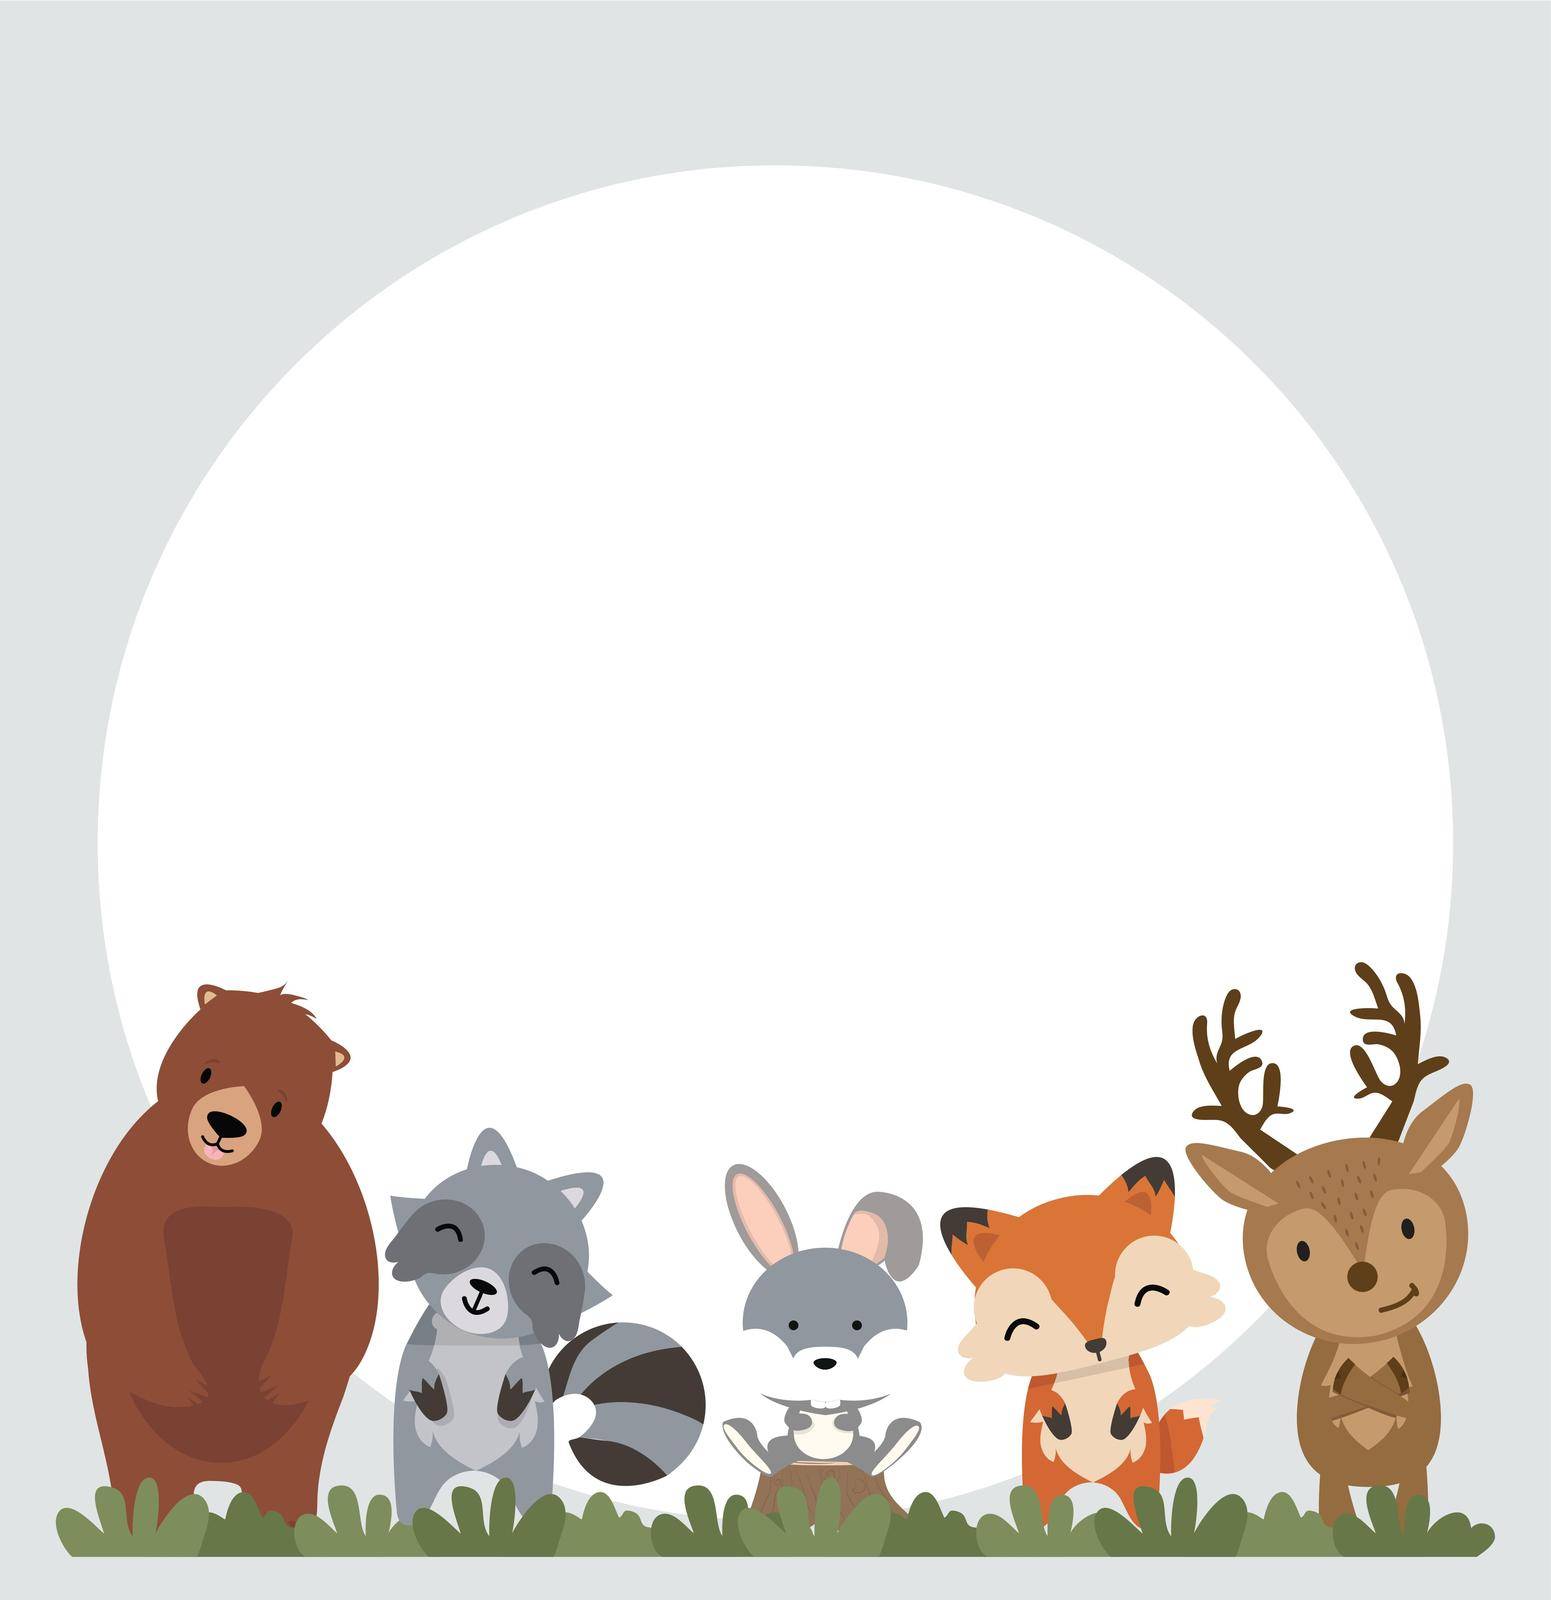 Set of woodland animals background by focus_bell